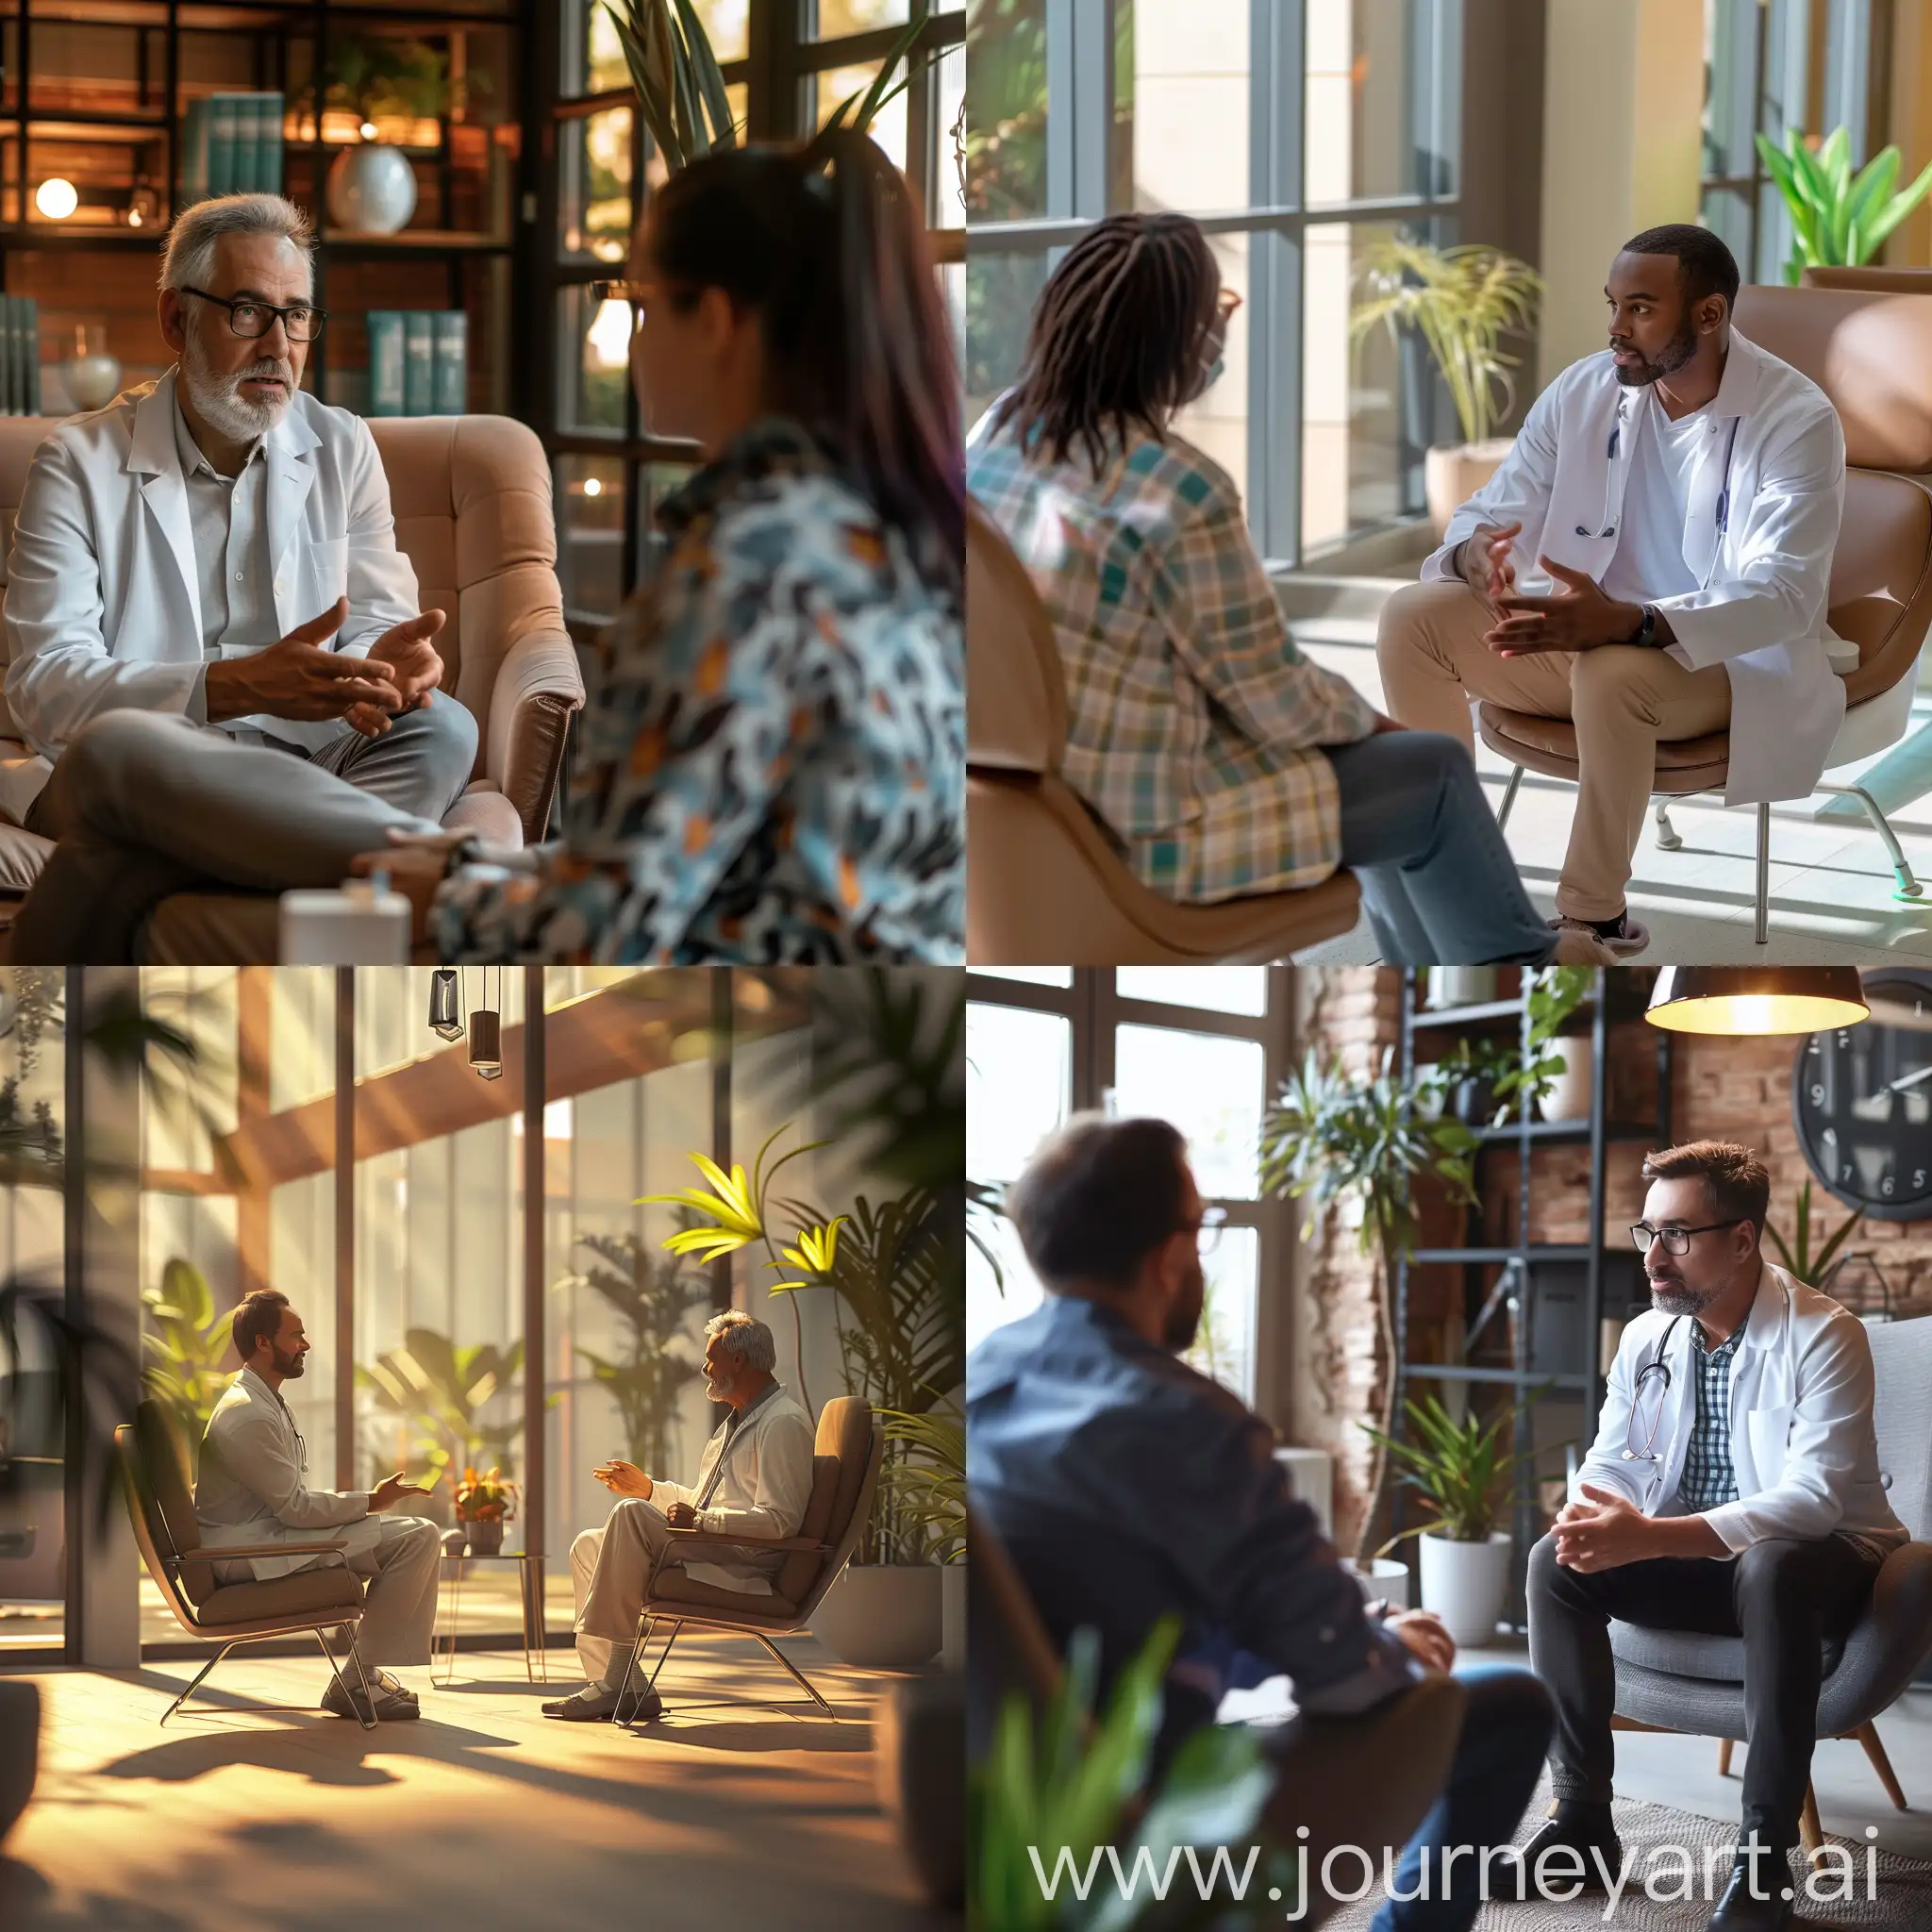 I wan't a photo-realistic image of a caring psychatrist having a talk with a patient in a relaxing indoor area